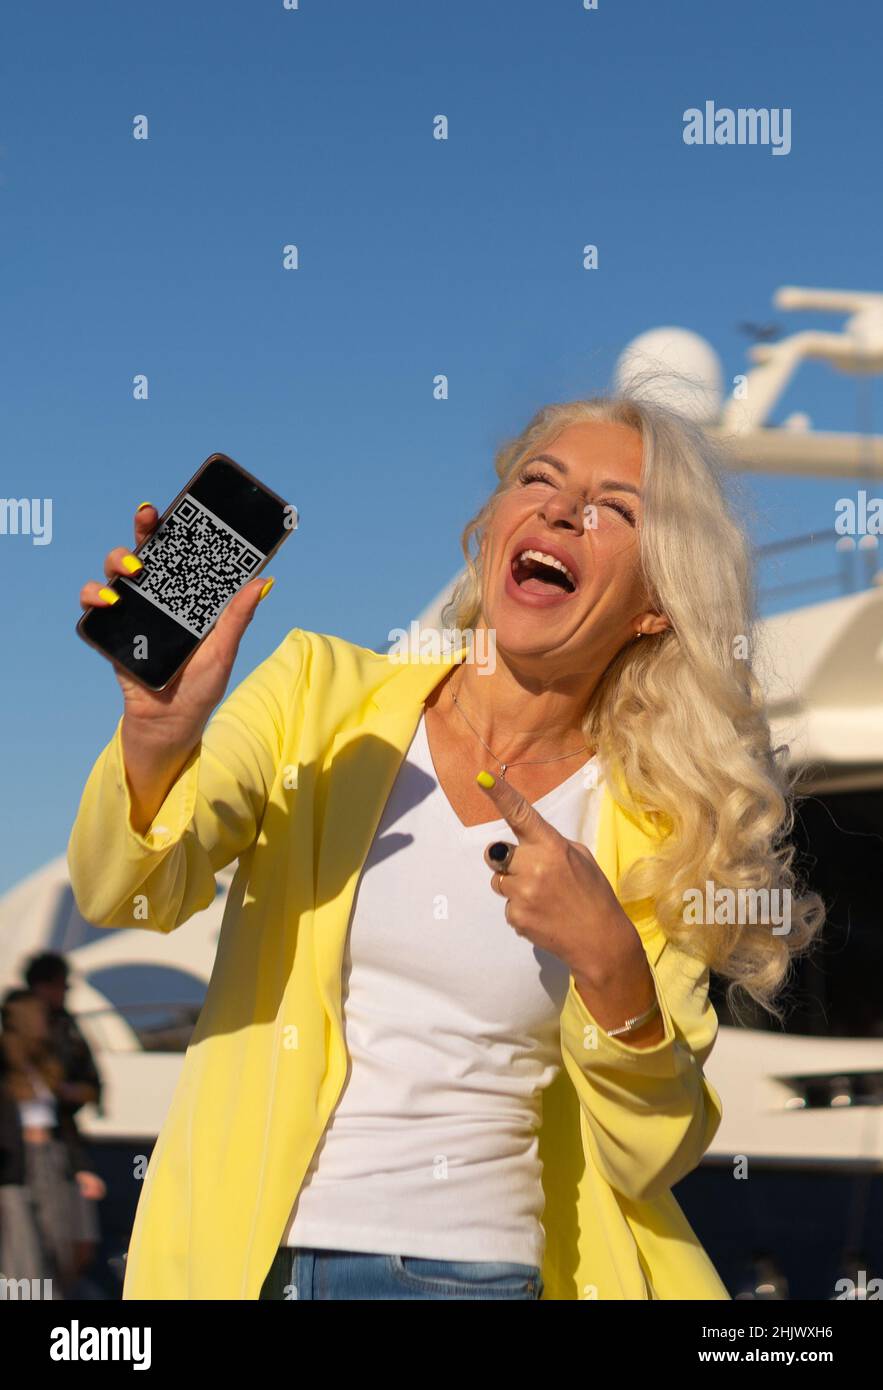 excited woman showing smartphone with qr code Stock Photo